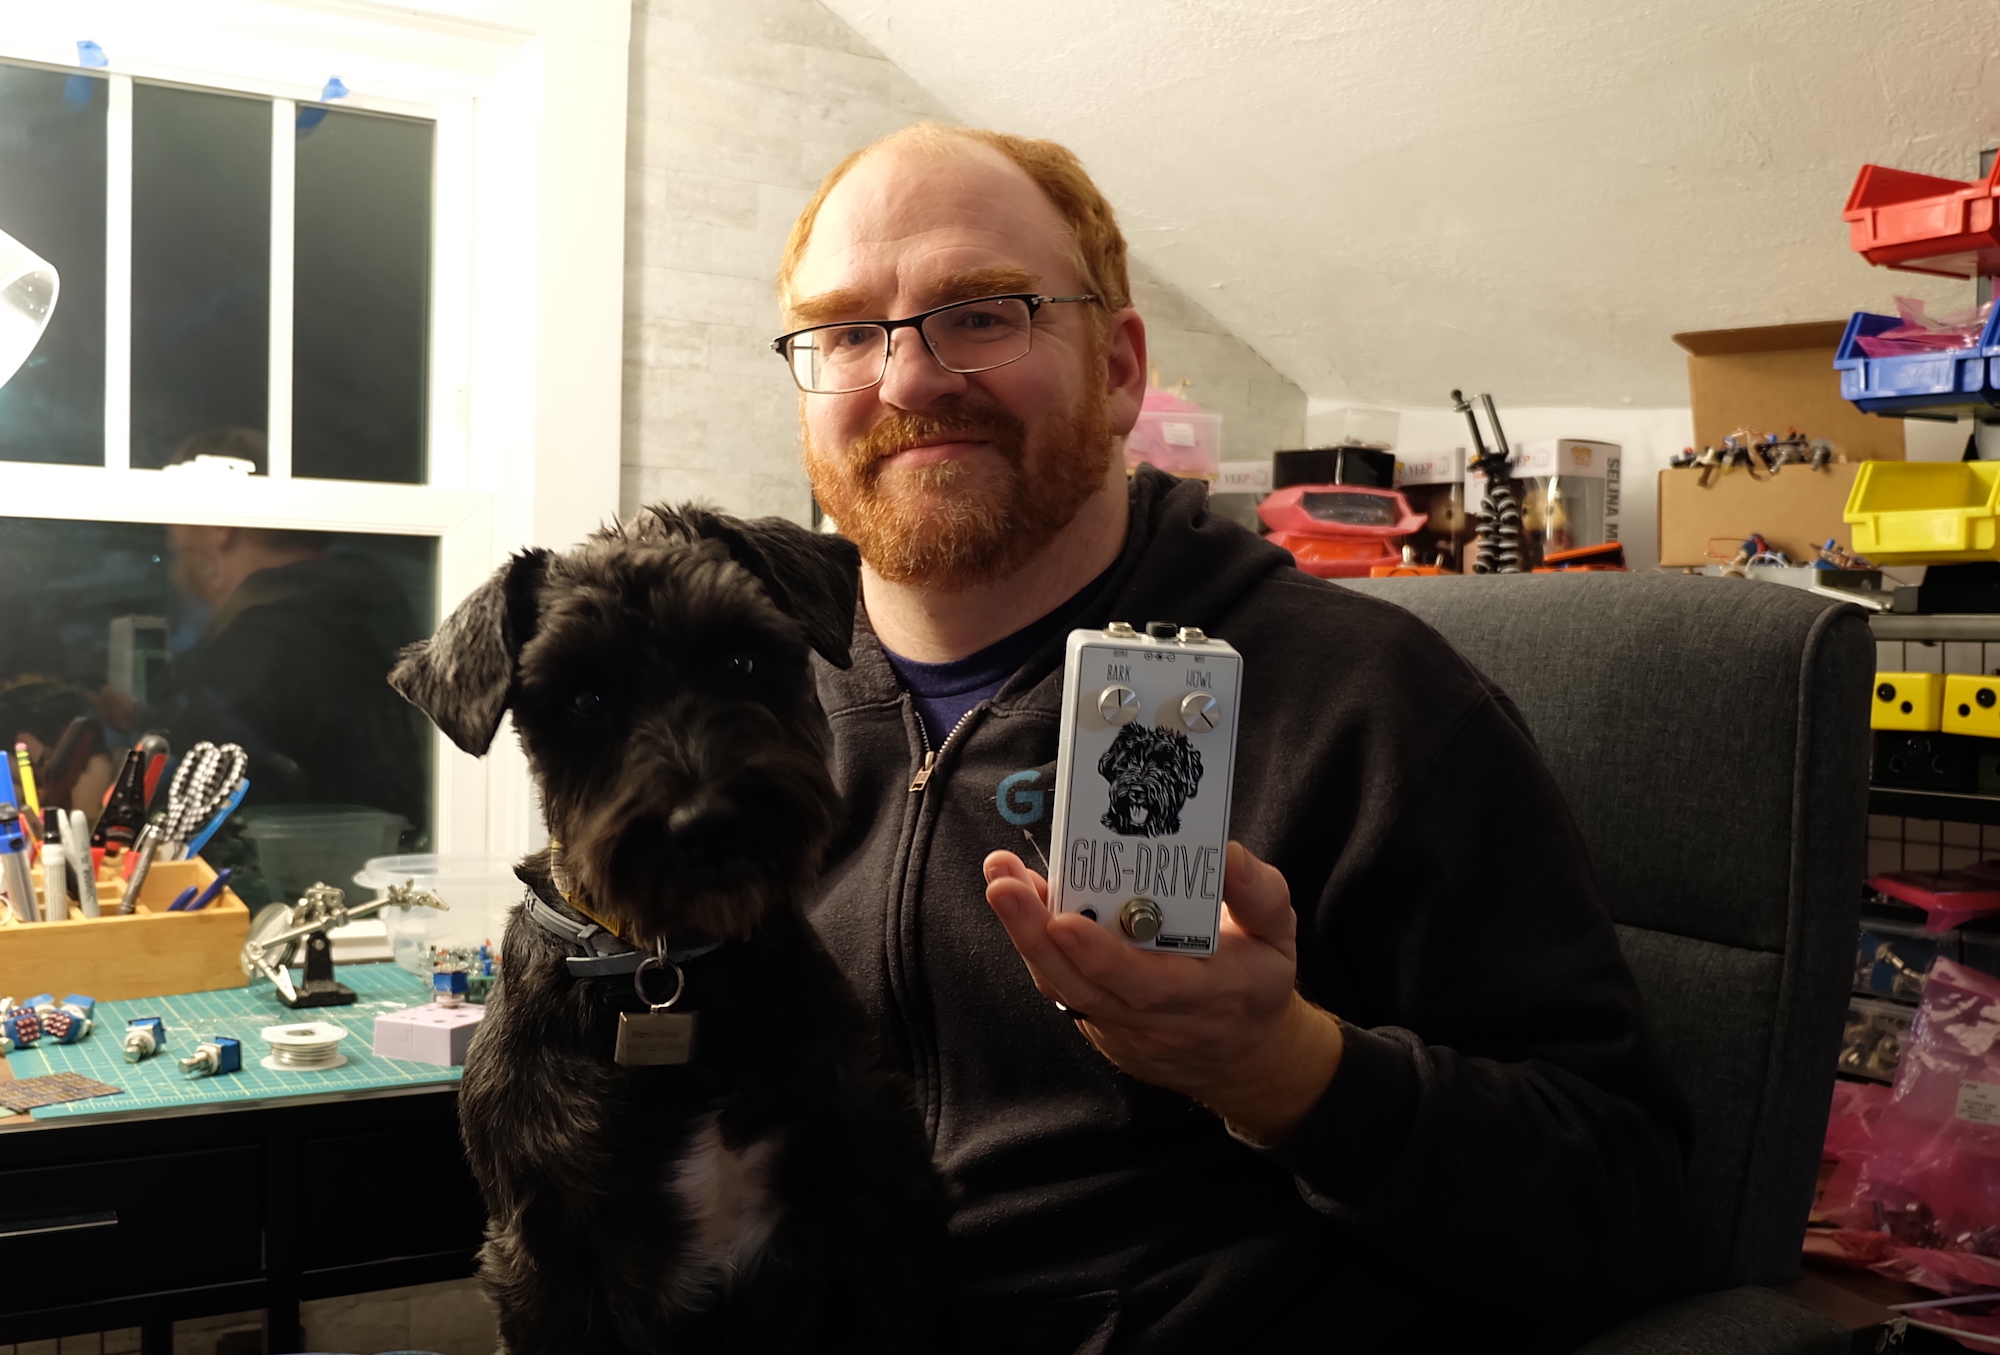 A school teacher, a dog, and the pedal that put them both on guitarists' radar. (Courtesy of Mark Turley)